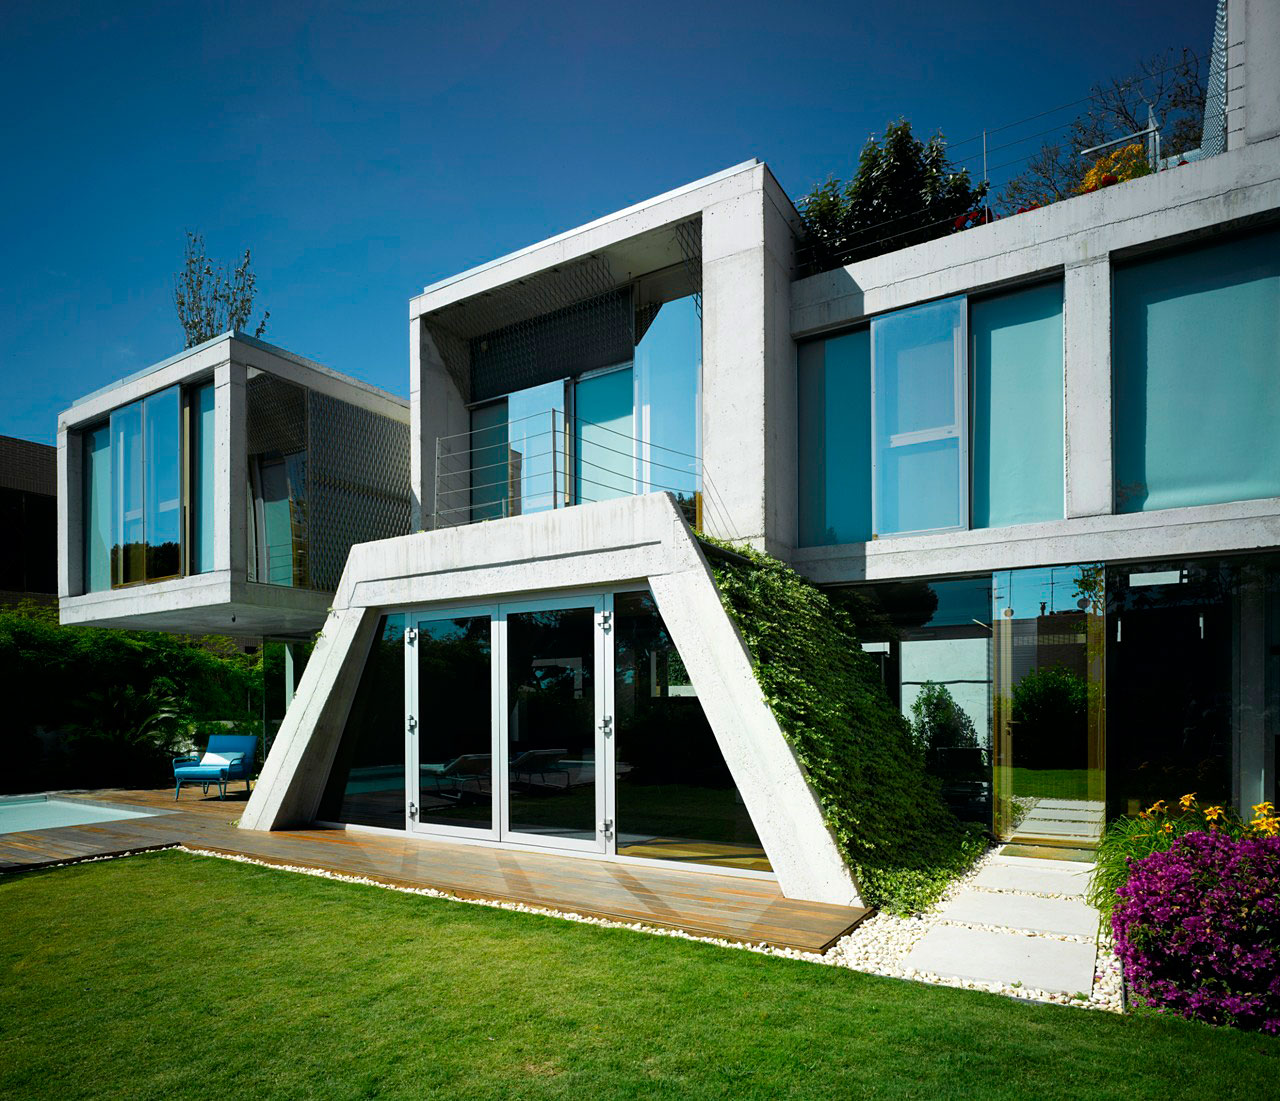 House Design Banon Enchanting House Design Of Garden Banon House With White Wall Which Is Made From Concrete And Blue Colored Glass Panel Windows Architecture  Perfect Modern House Design With Spacious And Pretty Garden 